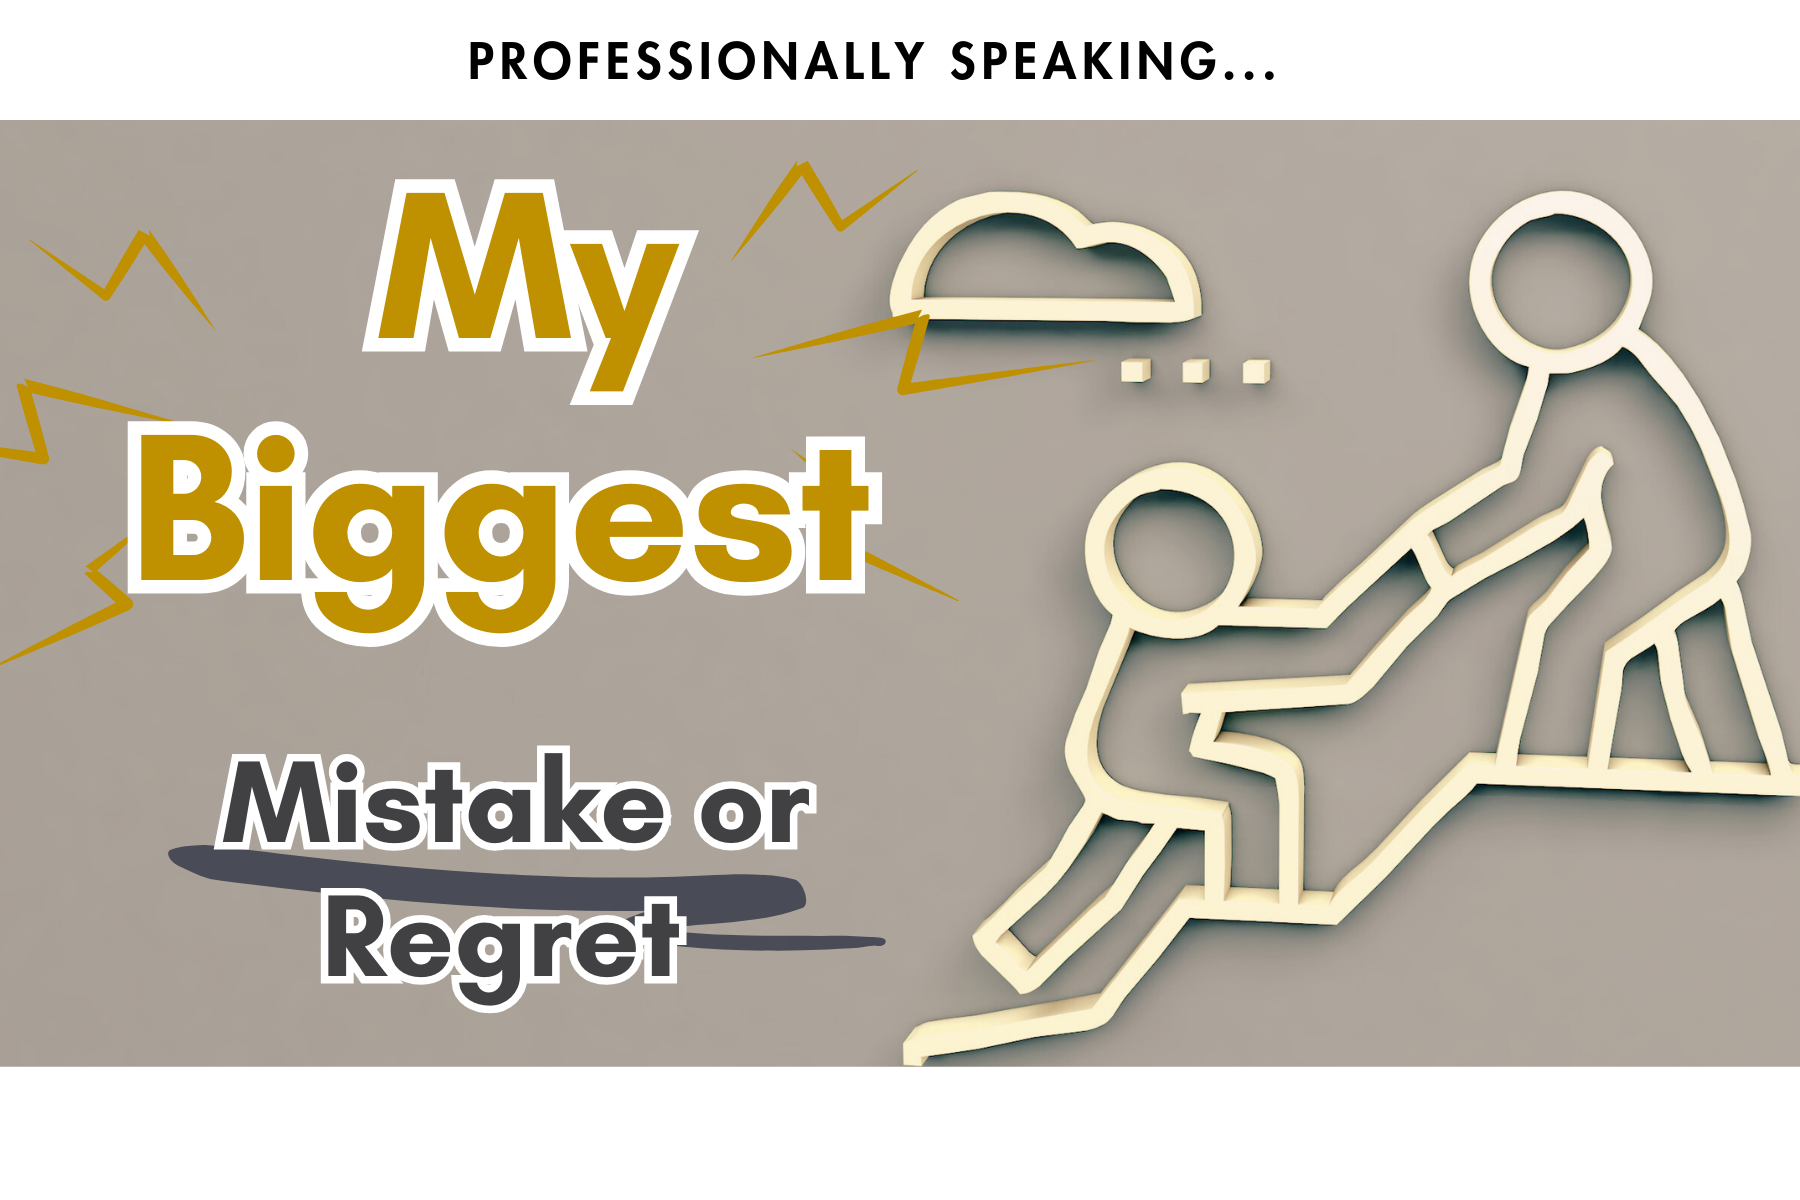 Professionally Speaking, My Biggest Mistake and Regret